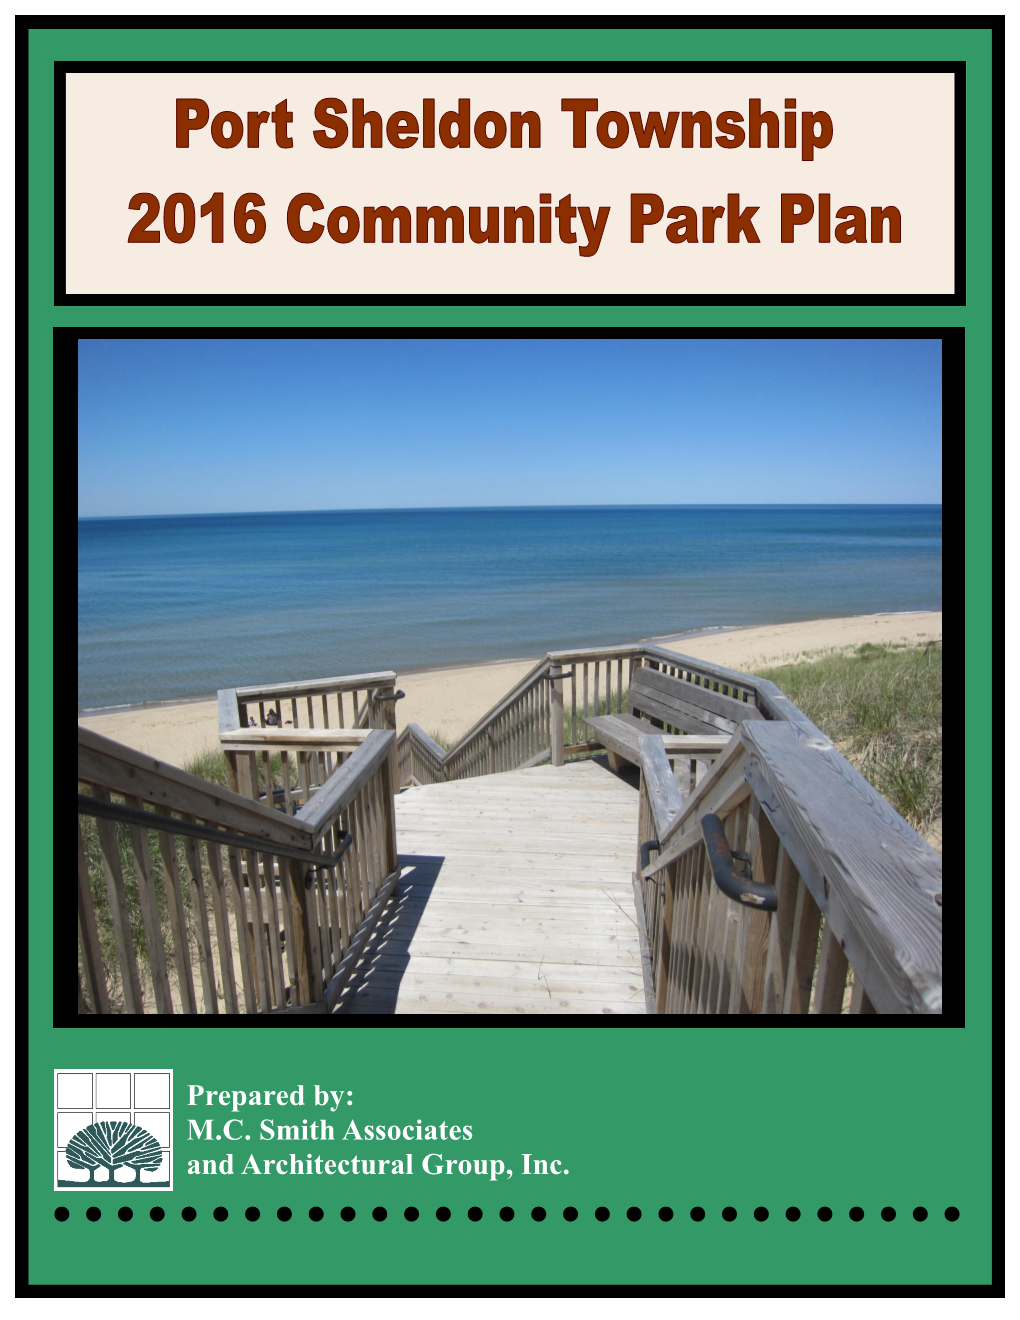 Prepared By: M.C. Smith Associates and Architectural Group, Inc. Port Sheldon Township Community Park, Recreation, Open Space and Greenway Plan